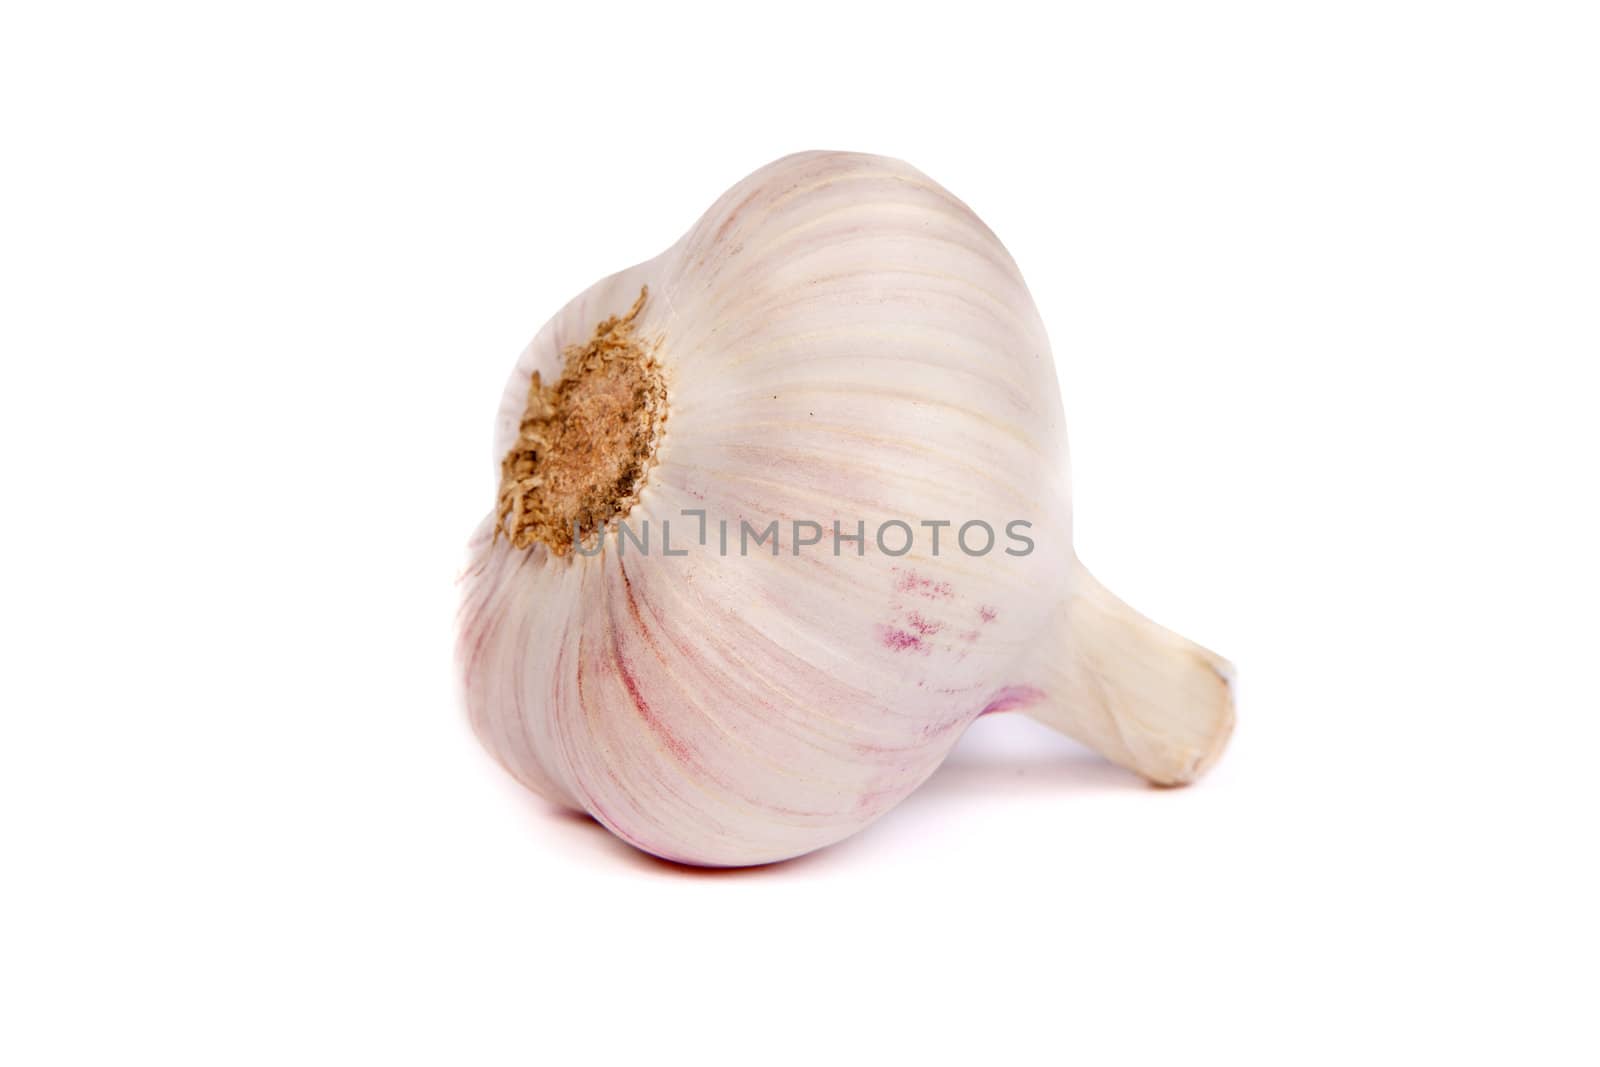 One garlic . A head of garlic isolated on a white background